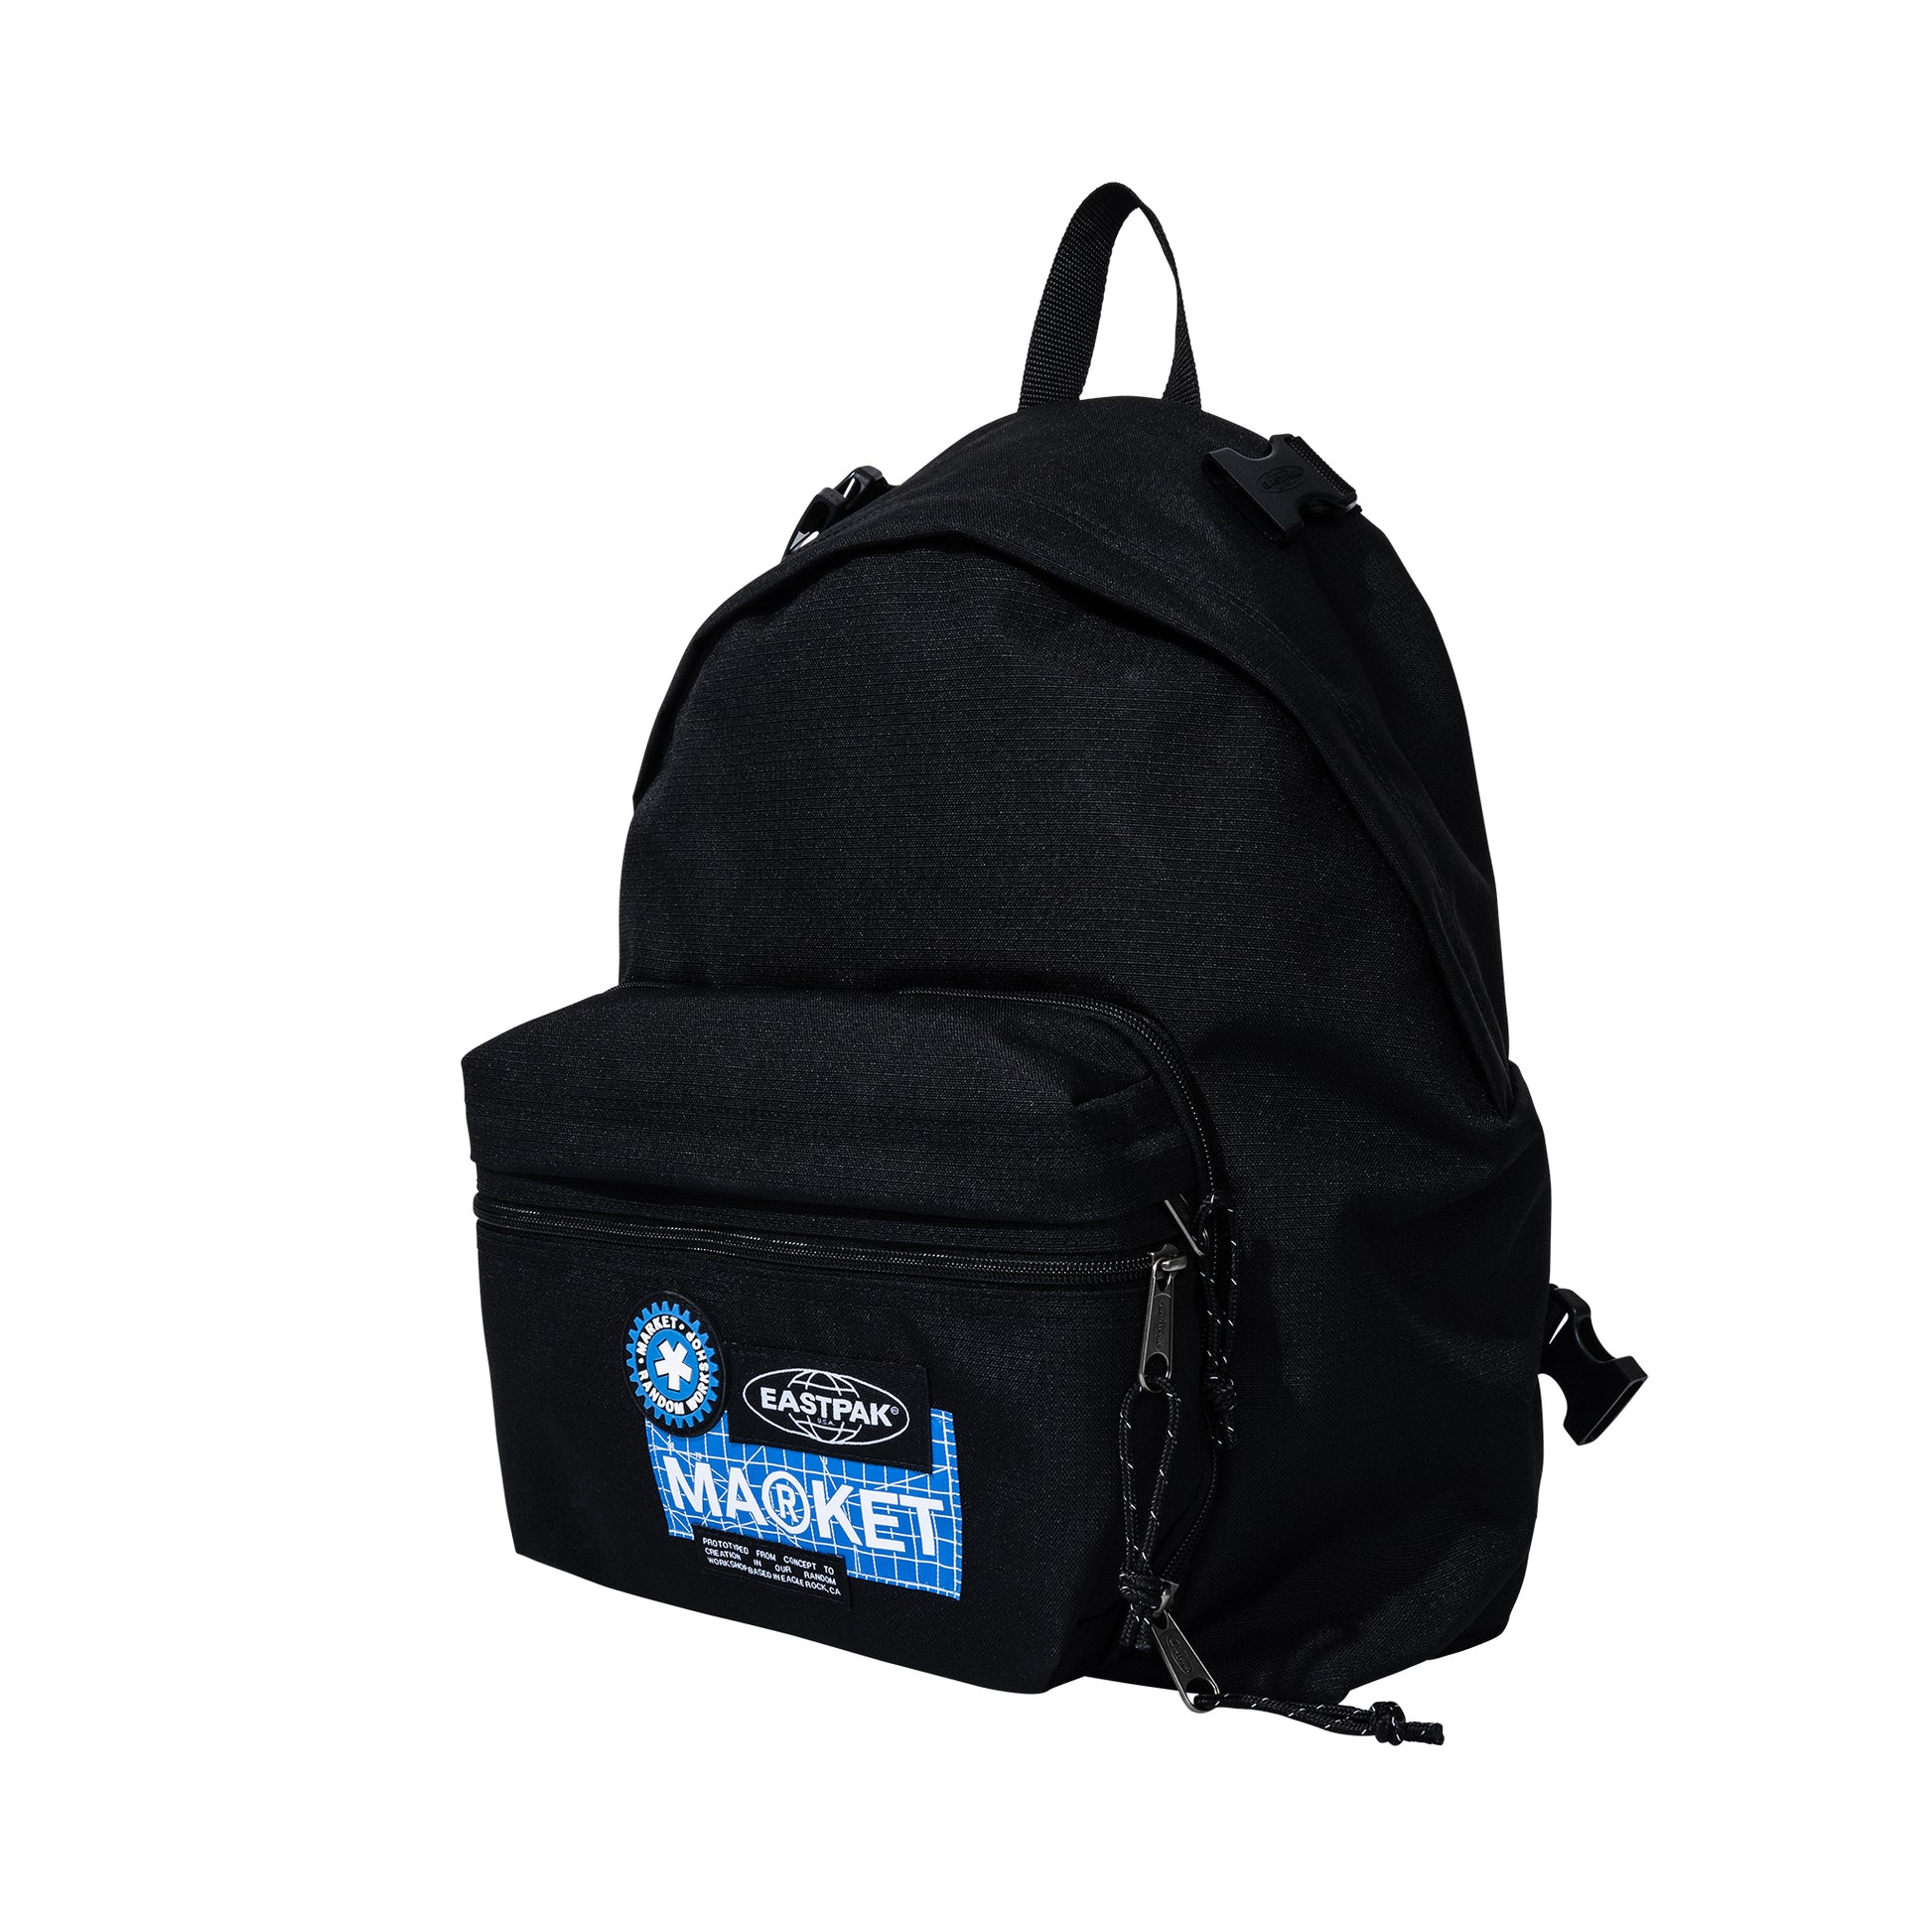 MARKET clothing brand MARKET X EASTPAK BASKETBALL BACKPACK. Find more basketballs, sporting goods, homegoods and graphic tees at MarketStudios.com. Formally Chinatown Market. 